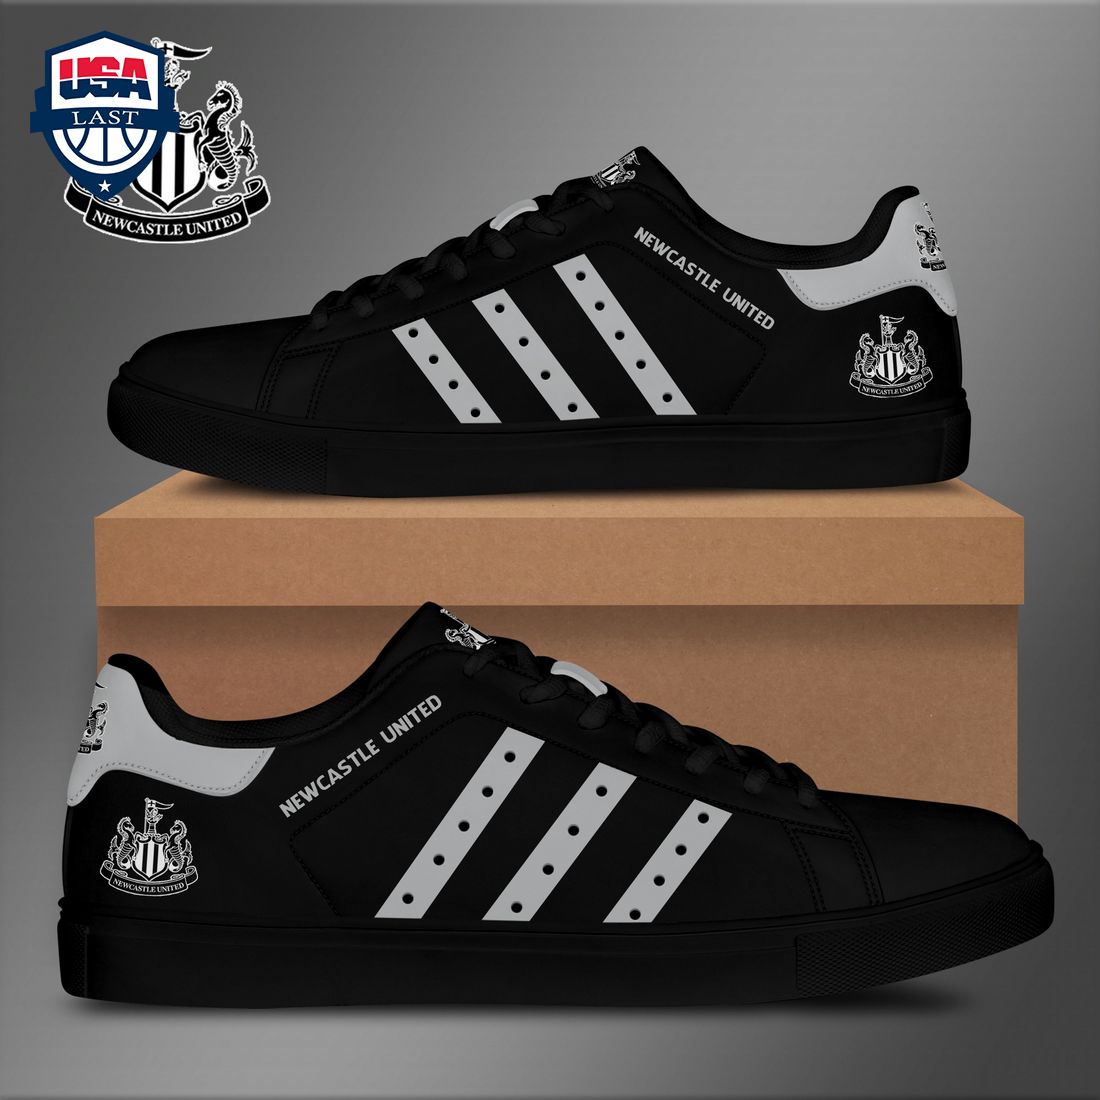 Newcastle United FC Grey Stripes Stan Smith Low Top Shoes - Rocking picture